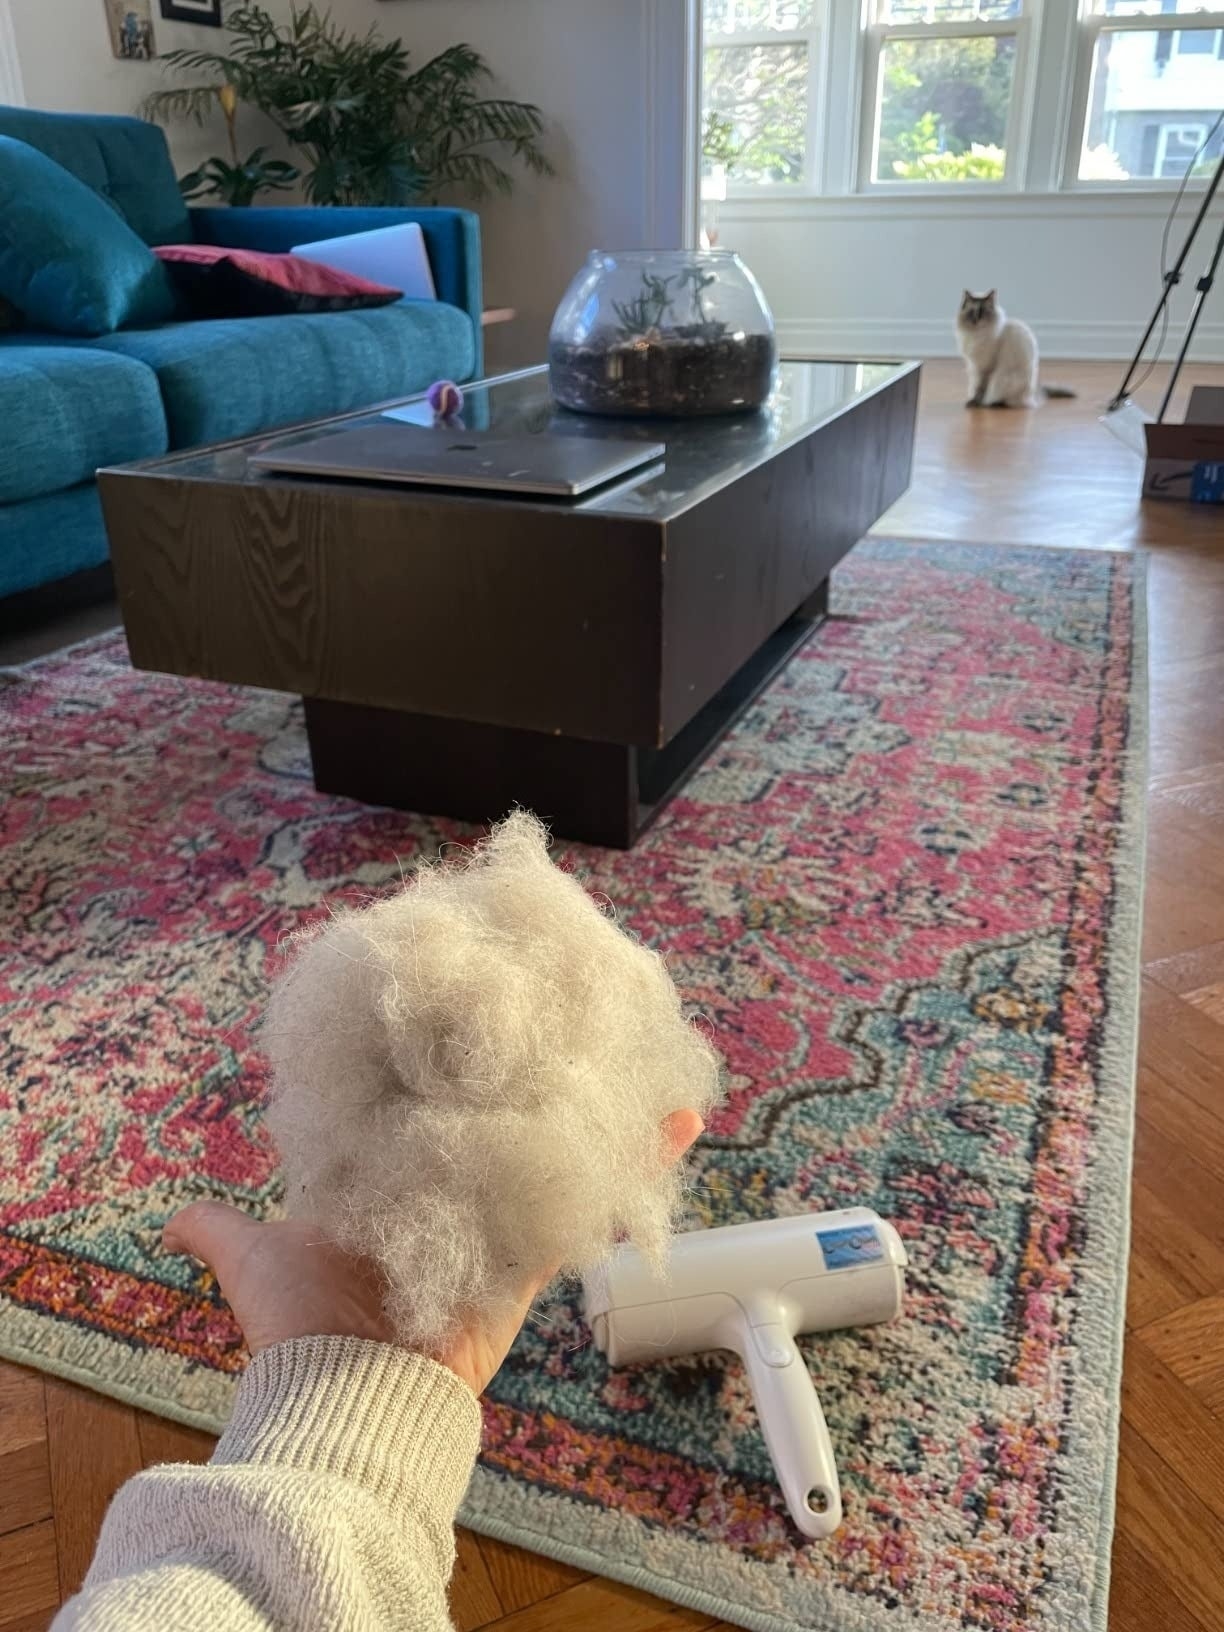 The reviewer holding up a giant hair ball collected from roller